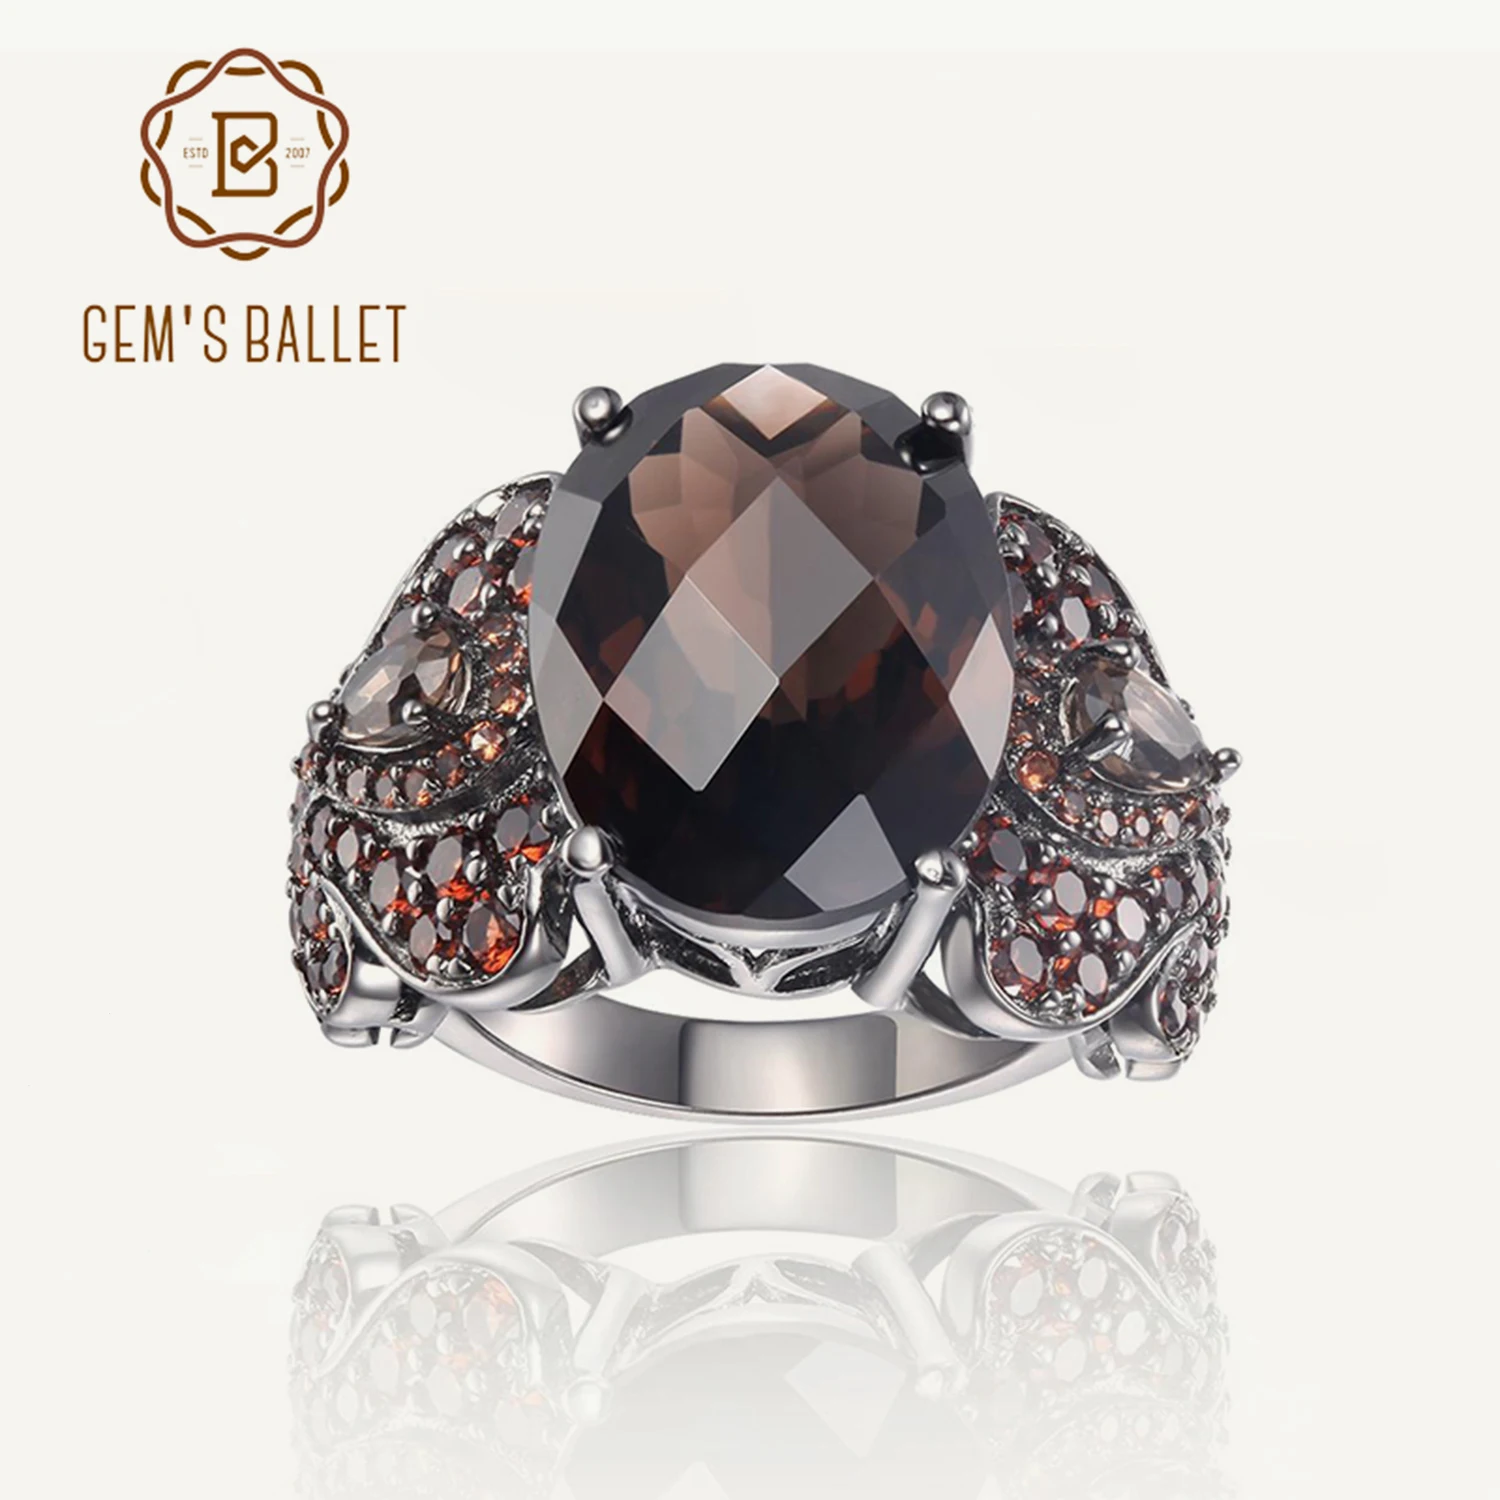 

GEM'S BALLET 925 Sterling Silver Cocktail Rings Special Design OCT Cutting Natural Smoky Quartz Gemstone Ring For Women Party